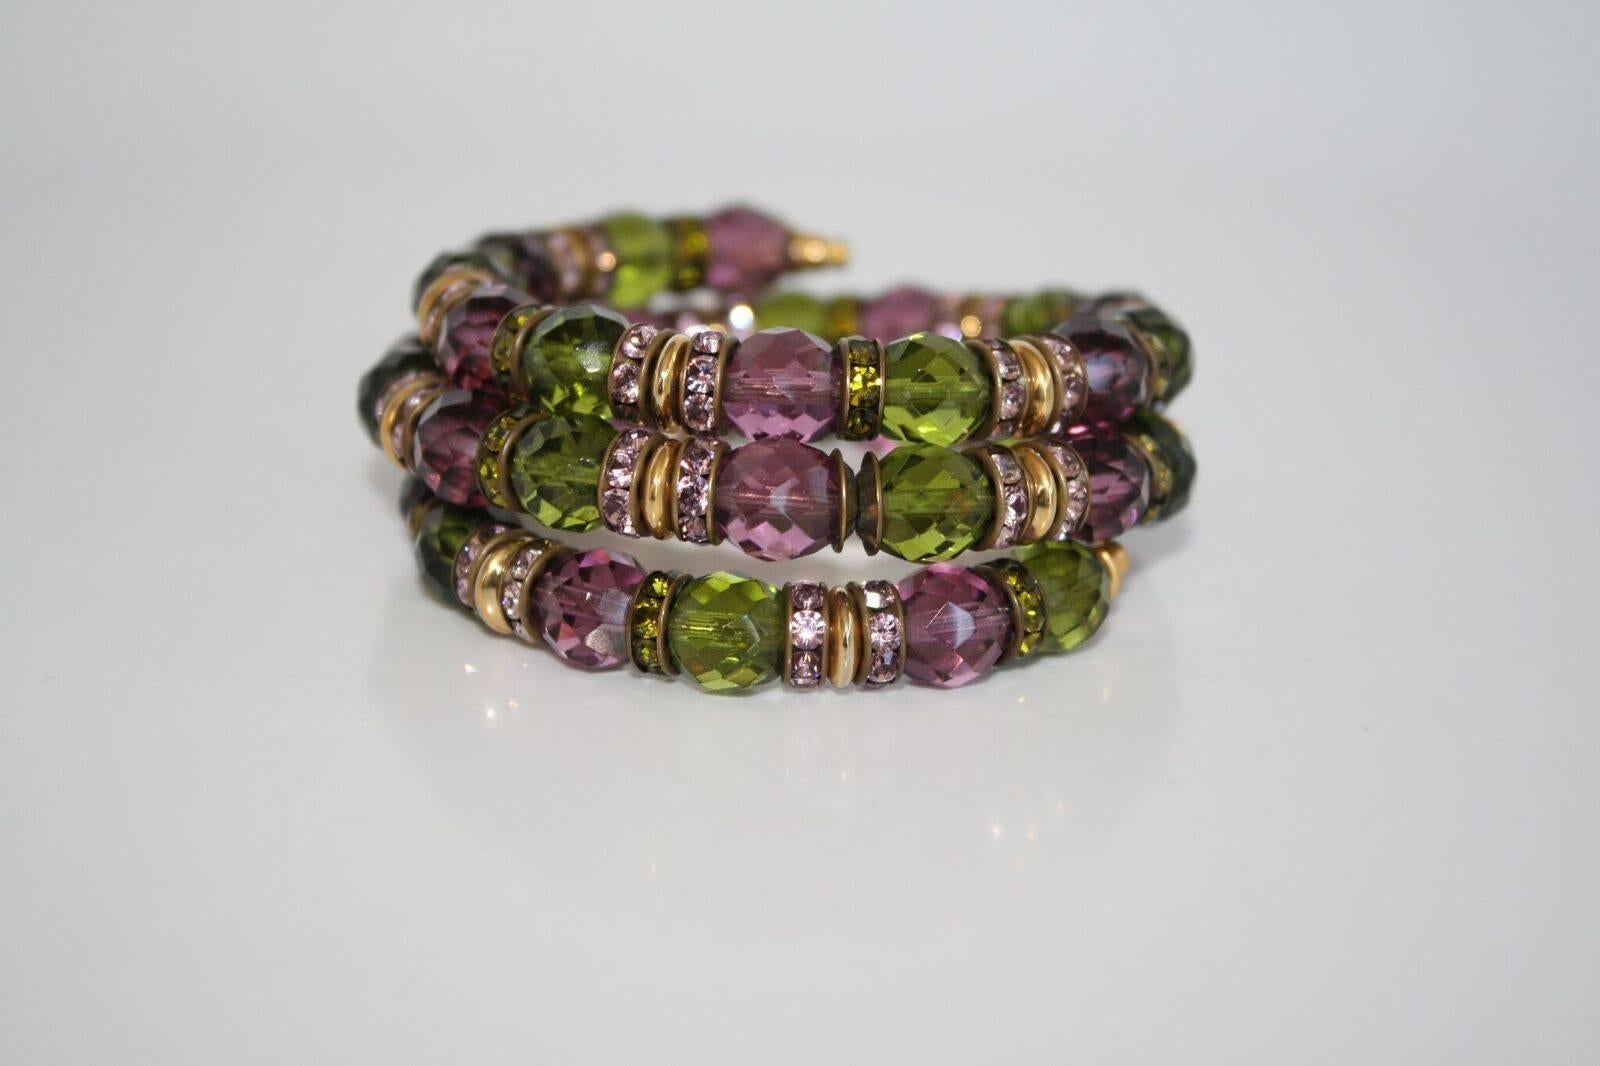 Green and purple faceted glass beads surrounded by Swarovski crystal and gold beads in this memory wire bracelet from Francoise Montague. 